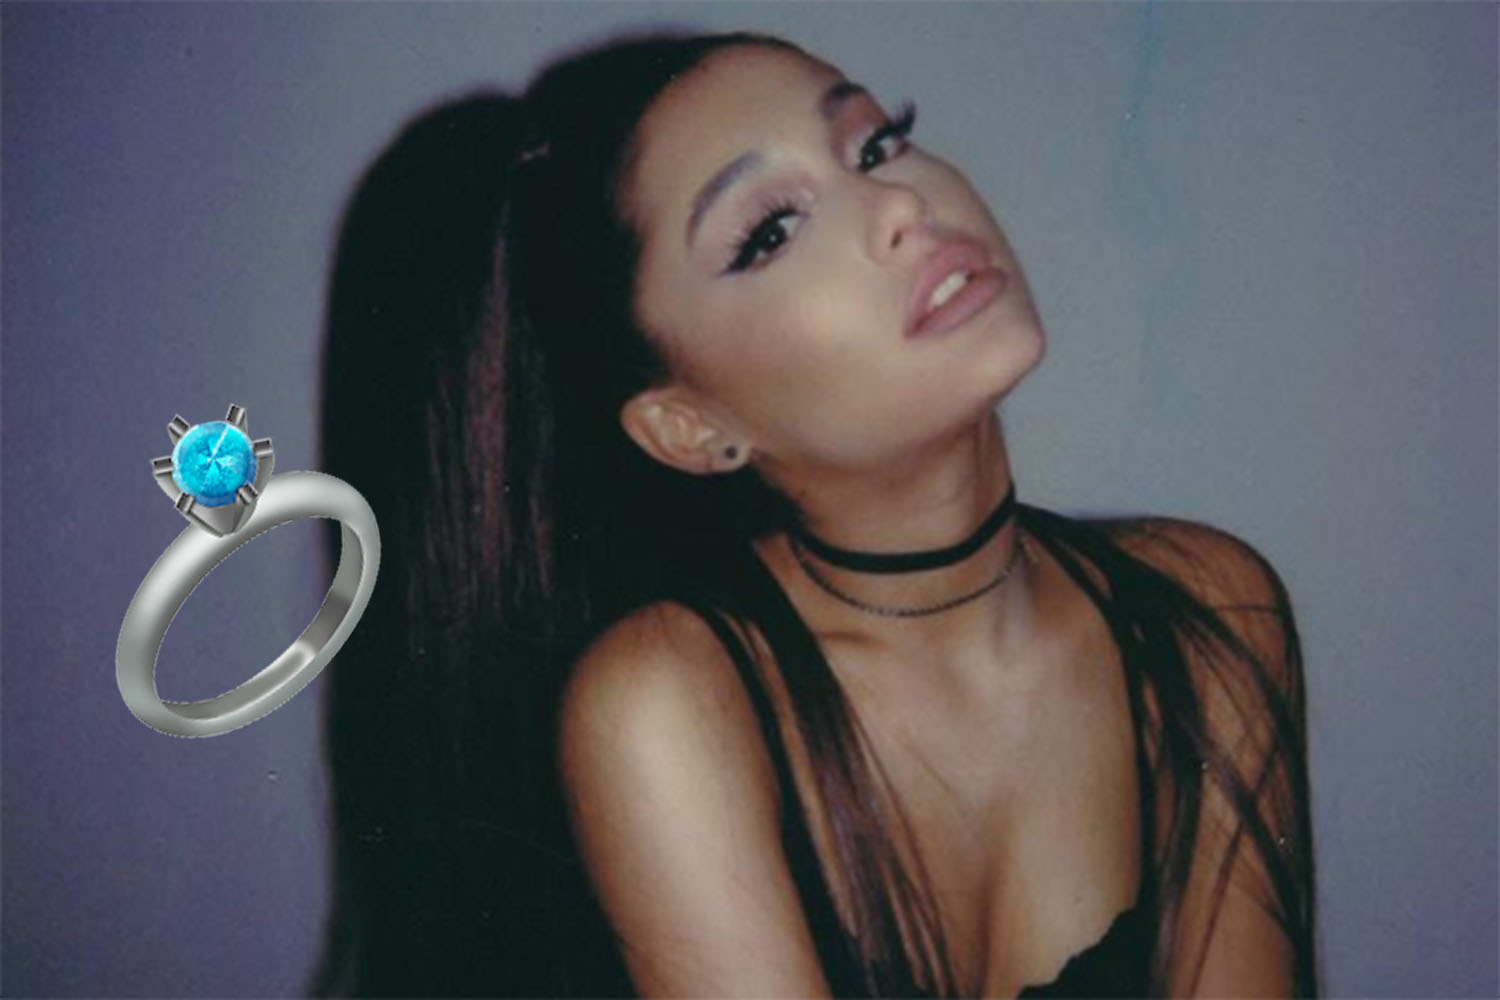 Ariana Grande Drops Release Date And Single Artwork For New